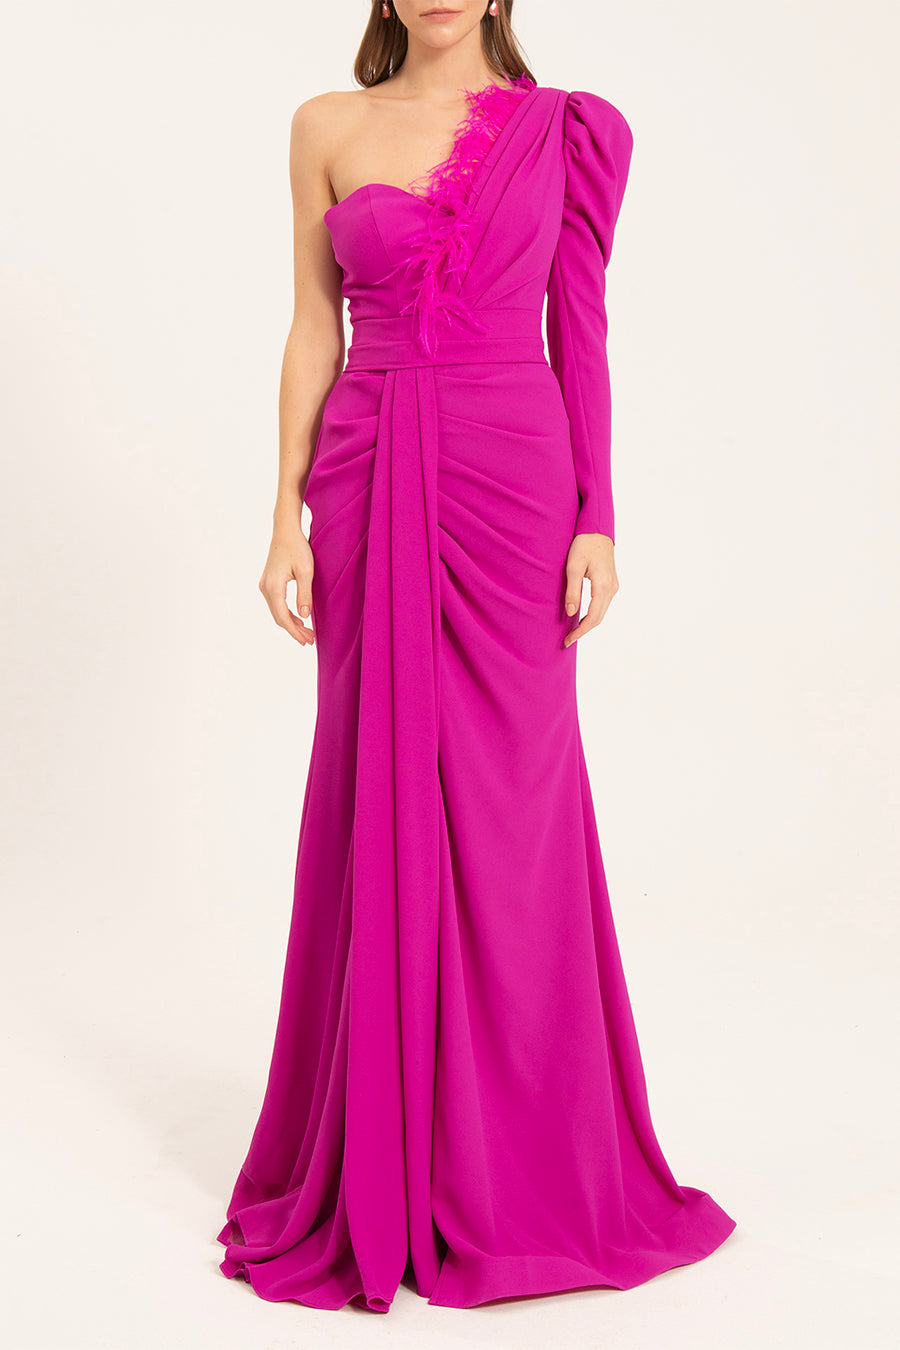 Mindy - Mystic Evenings | Evening and Prom Dresses